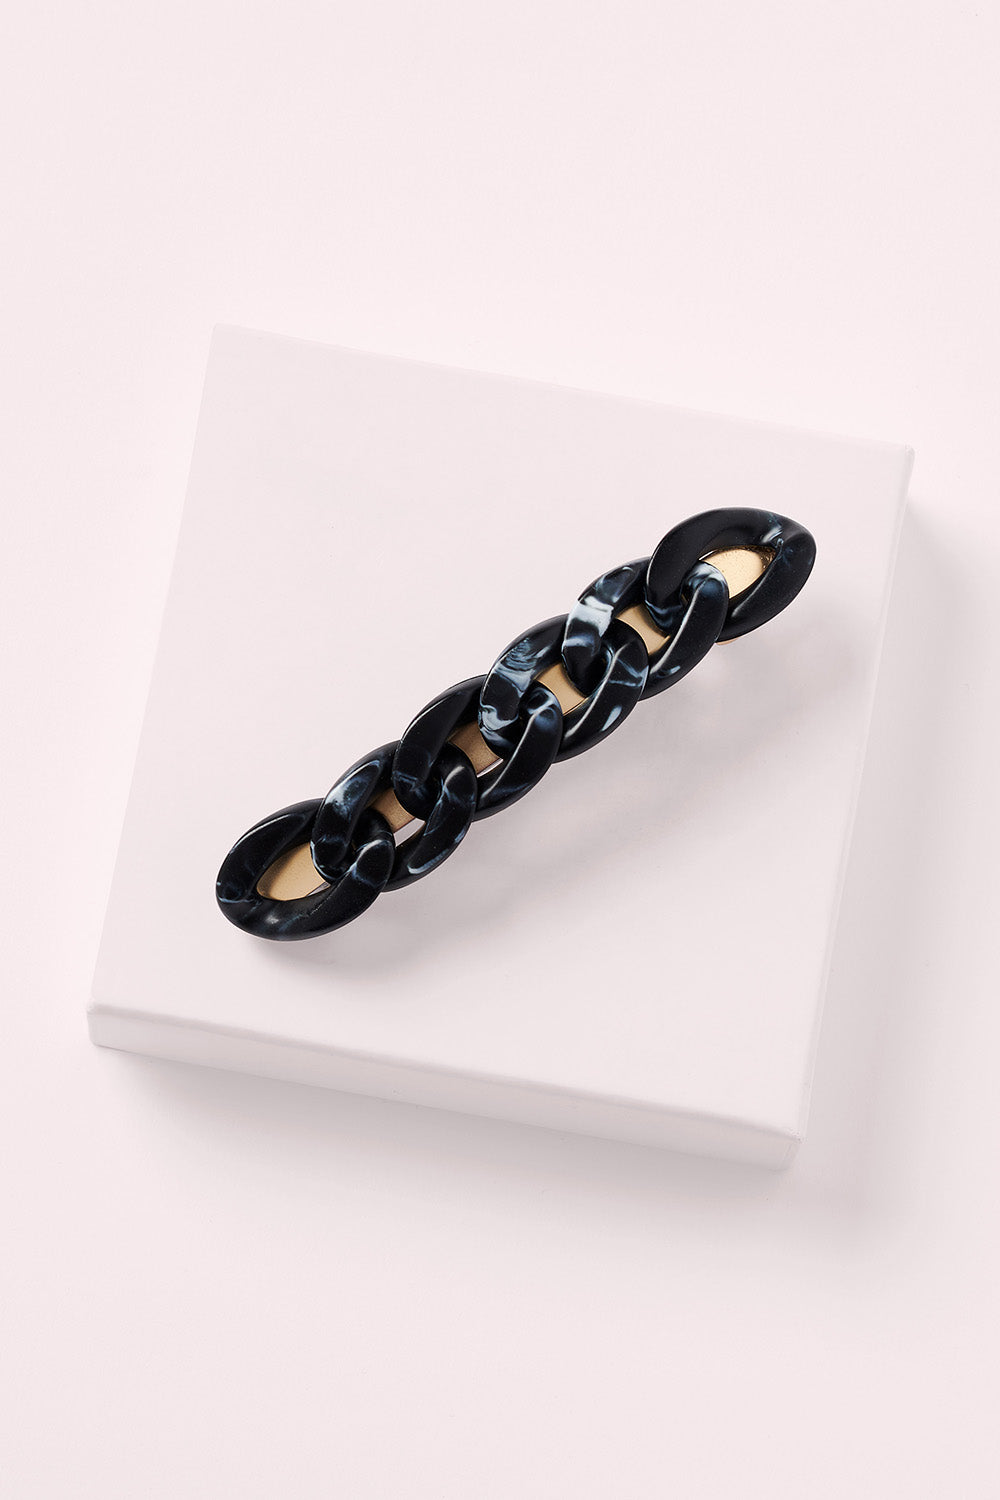 cable baguette barrette in black marble on white box